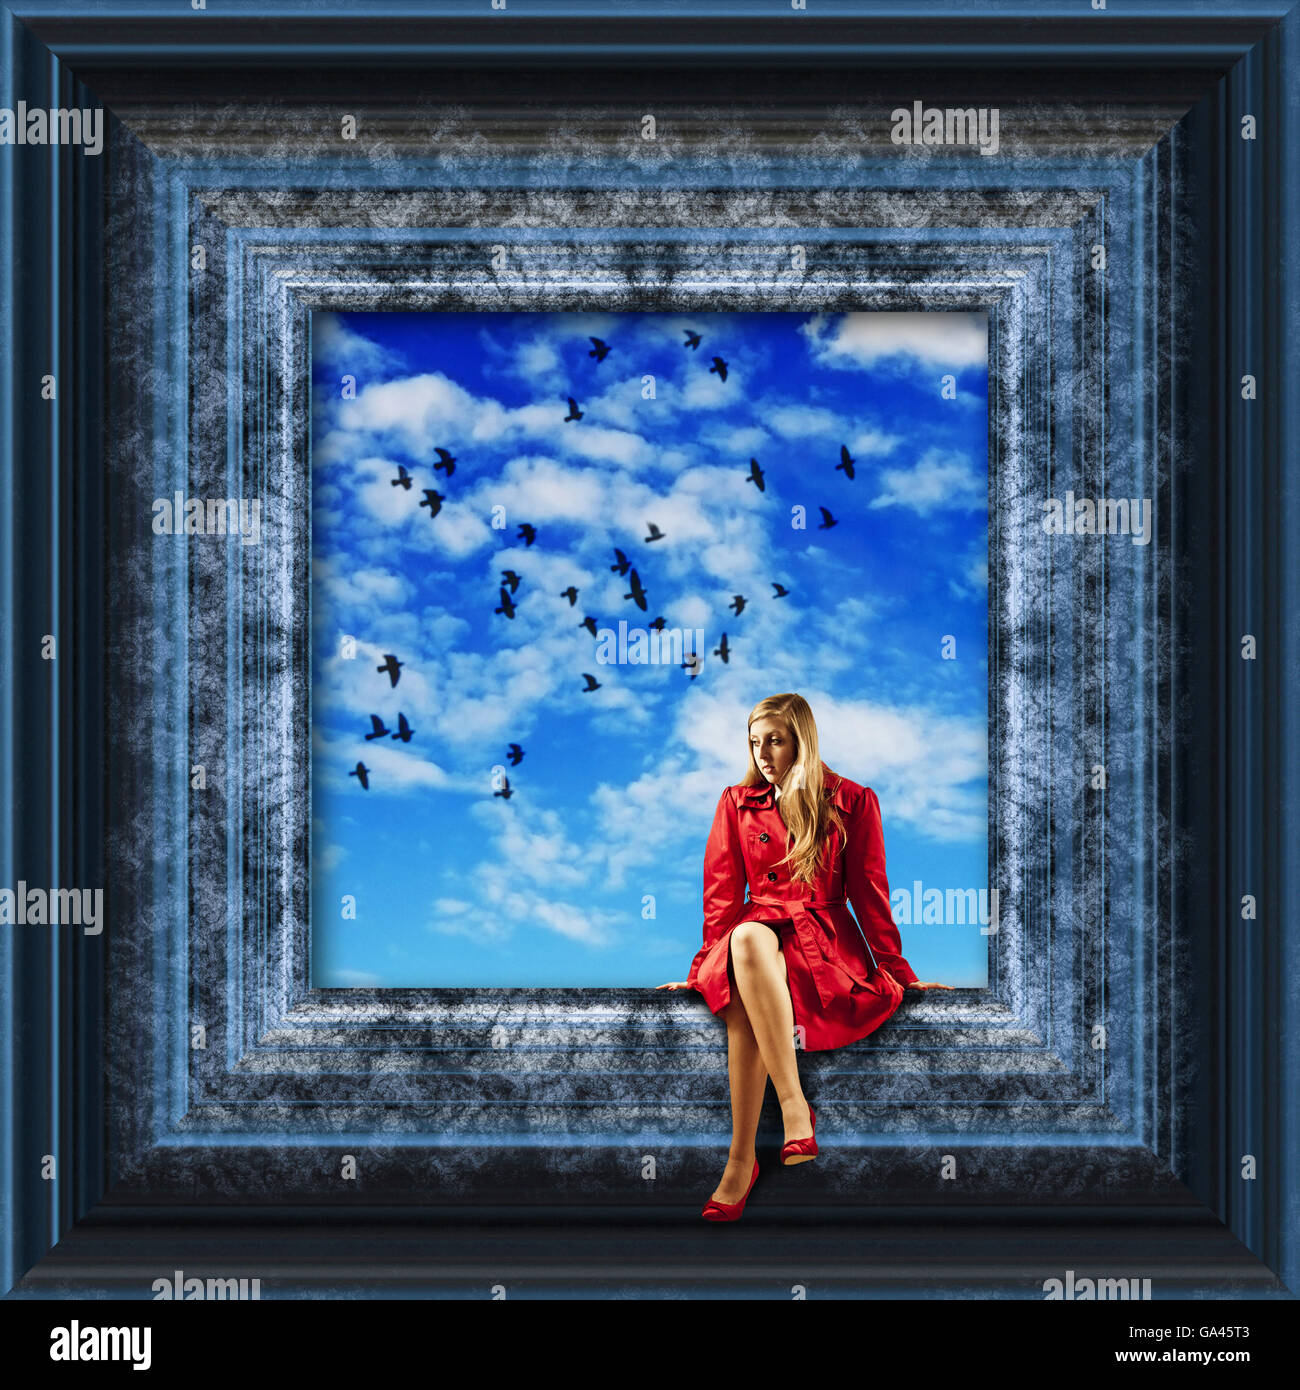 girl in red coat sitting on the edge of a picture frame with birds flying over a blue sky Stock Photo